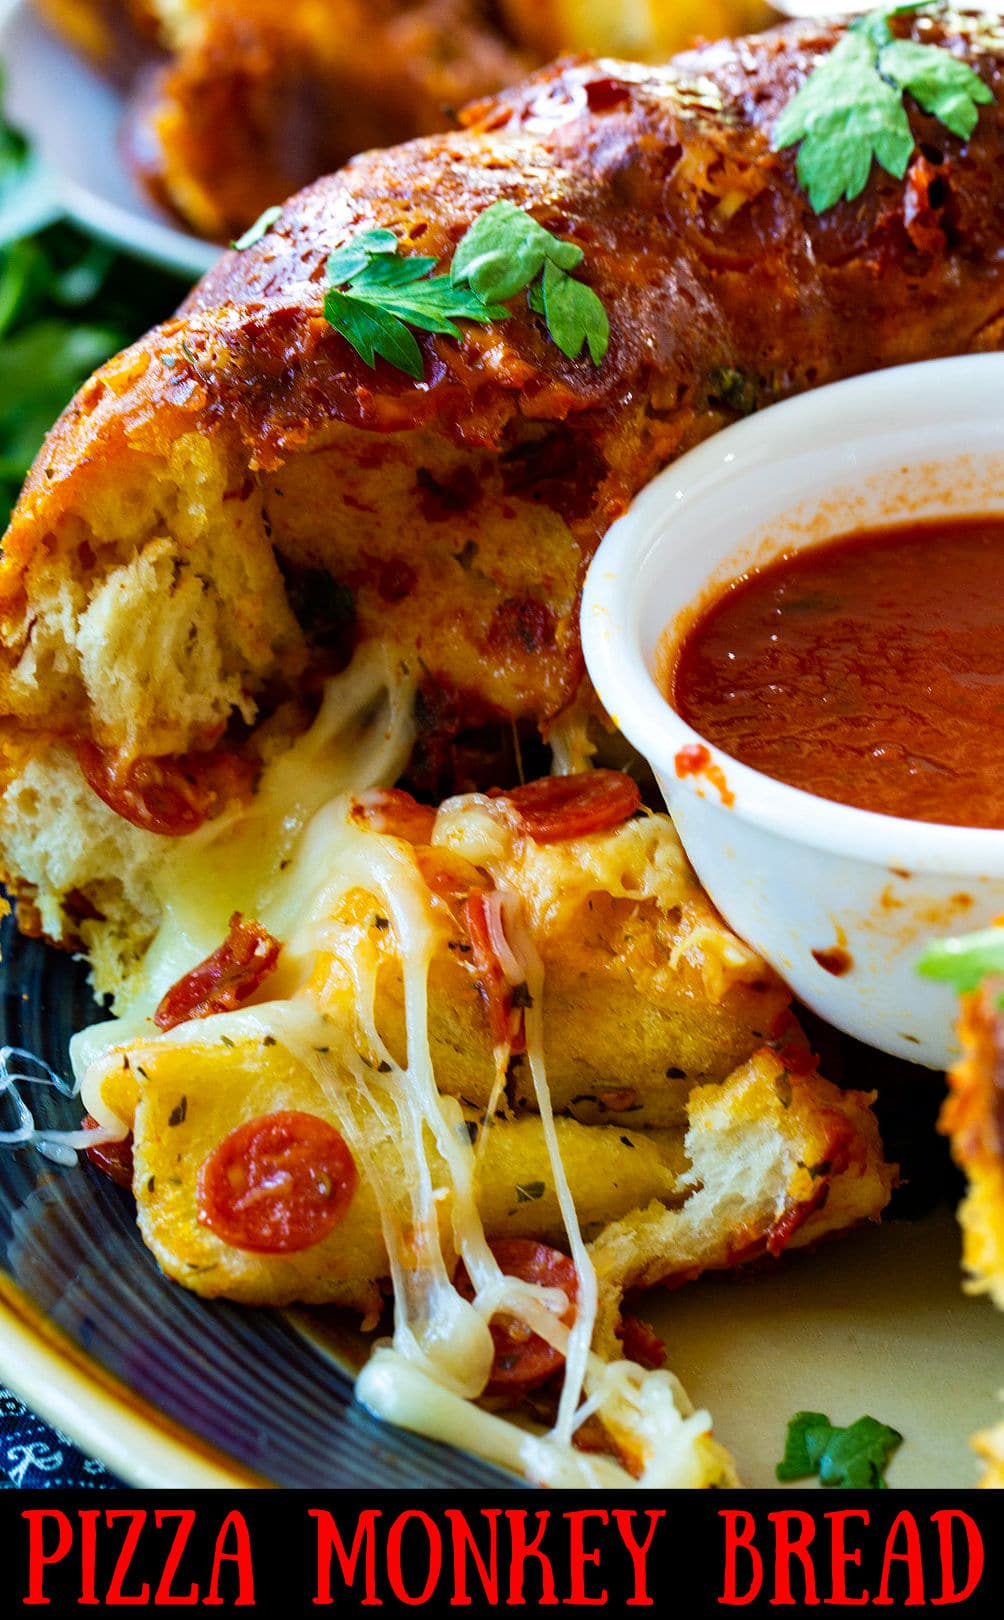 Pizza Monkey Bread on a plate with bowl of marinara sauce.